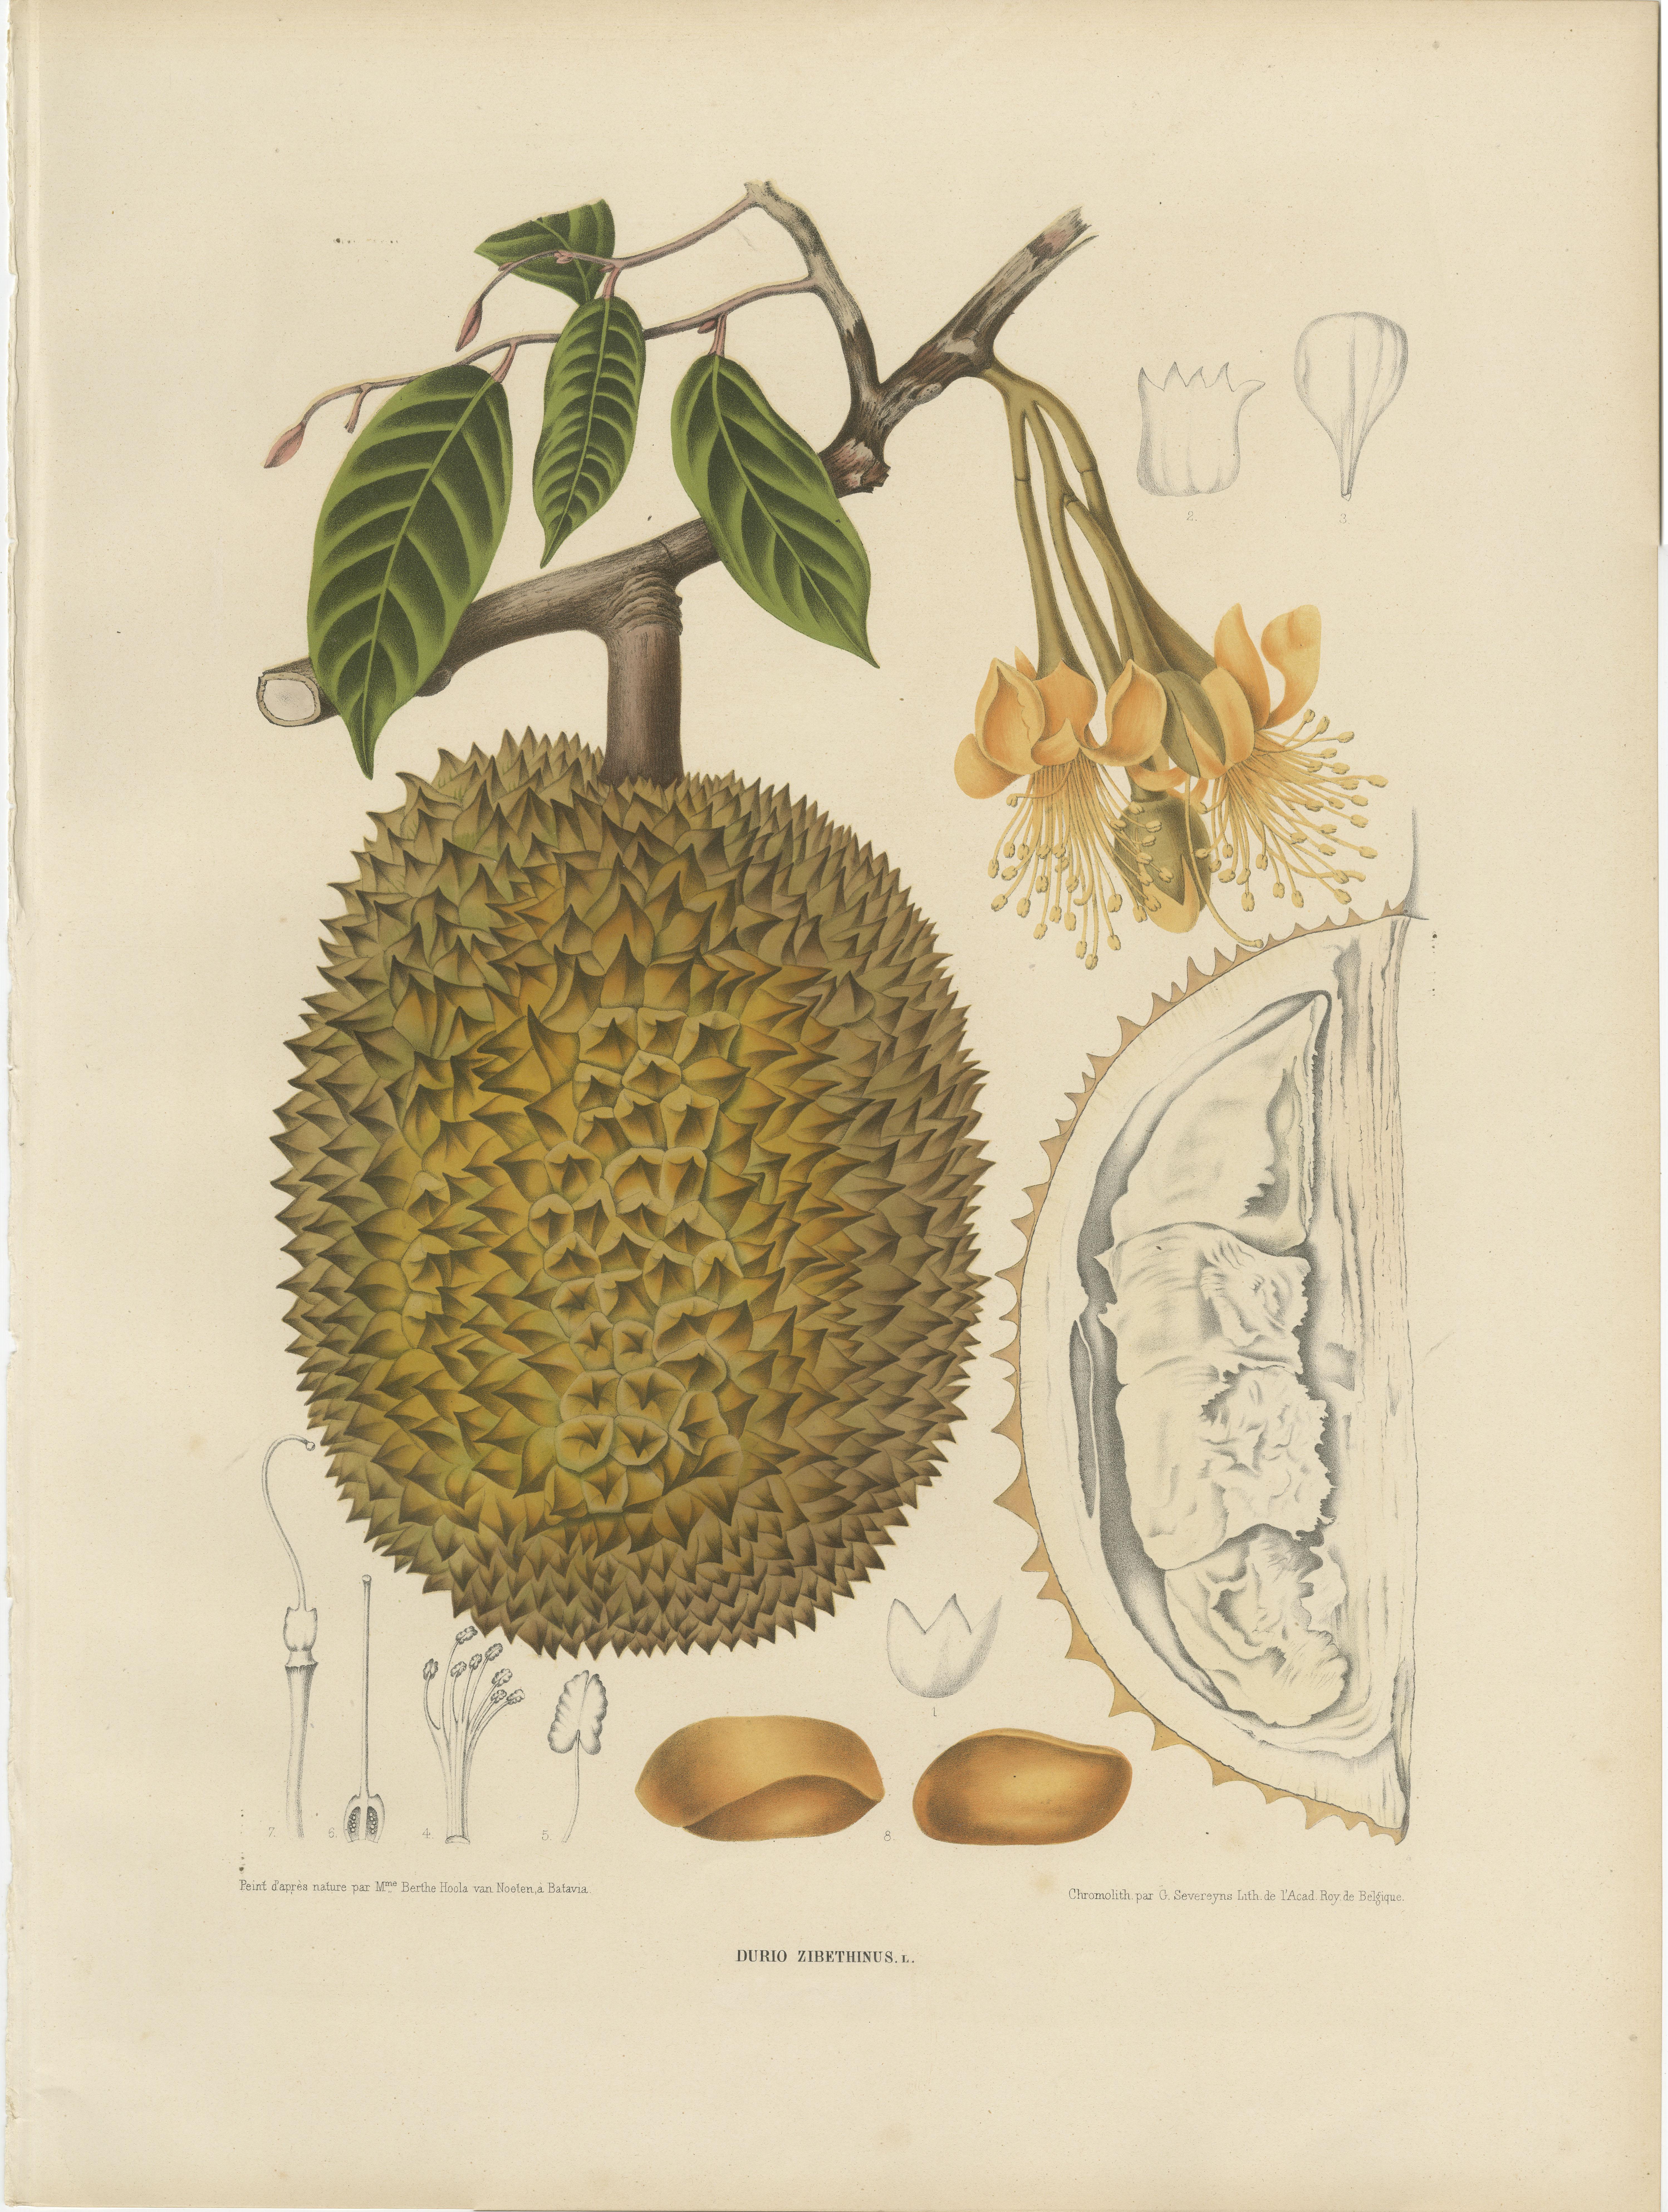 Antique print titled 'Durio Zibethinus'. Large and rare chromolithograph of the durio zibethinus, the most common tree species in the genus Durio that are known as durian and have edible fruit also known as durian. As with most other durian species,